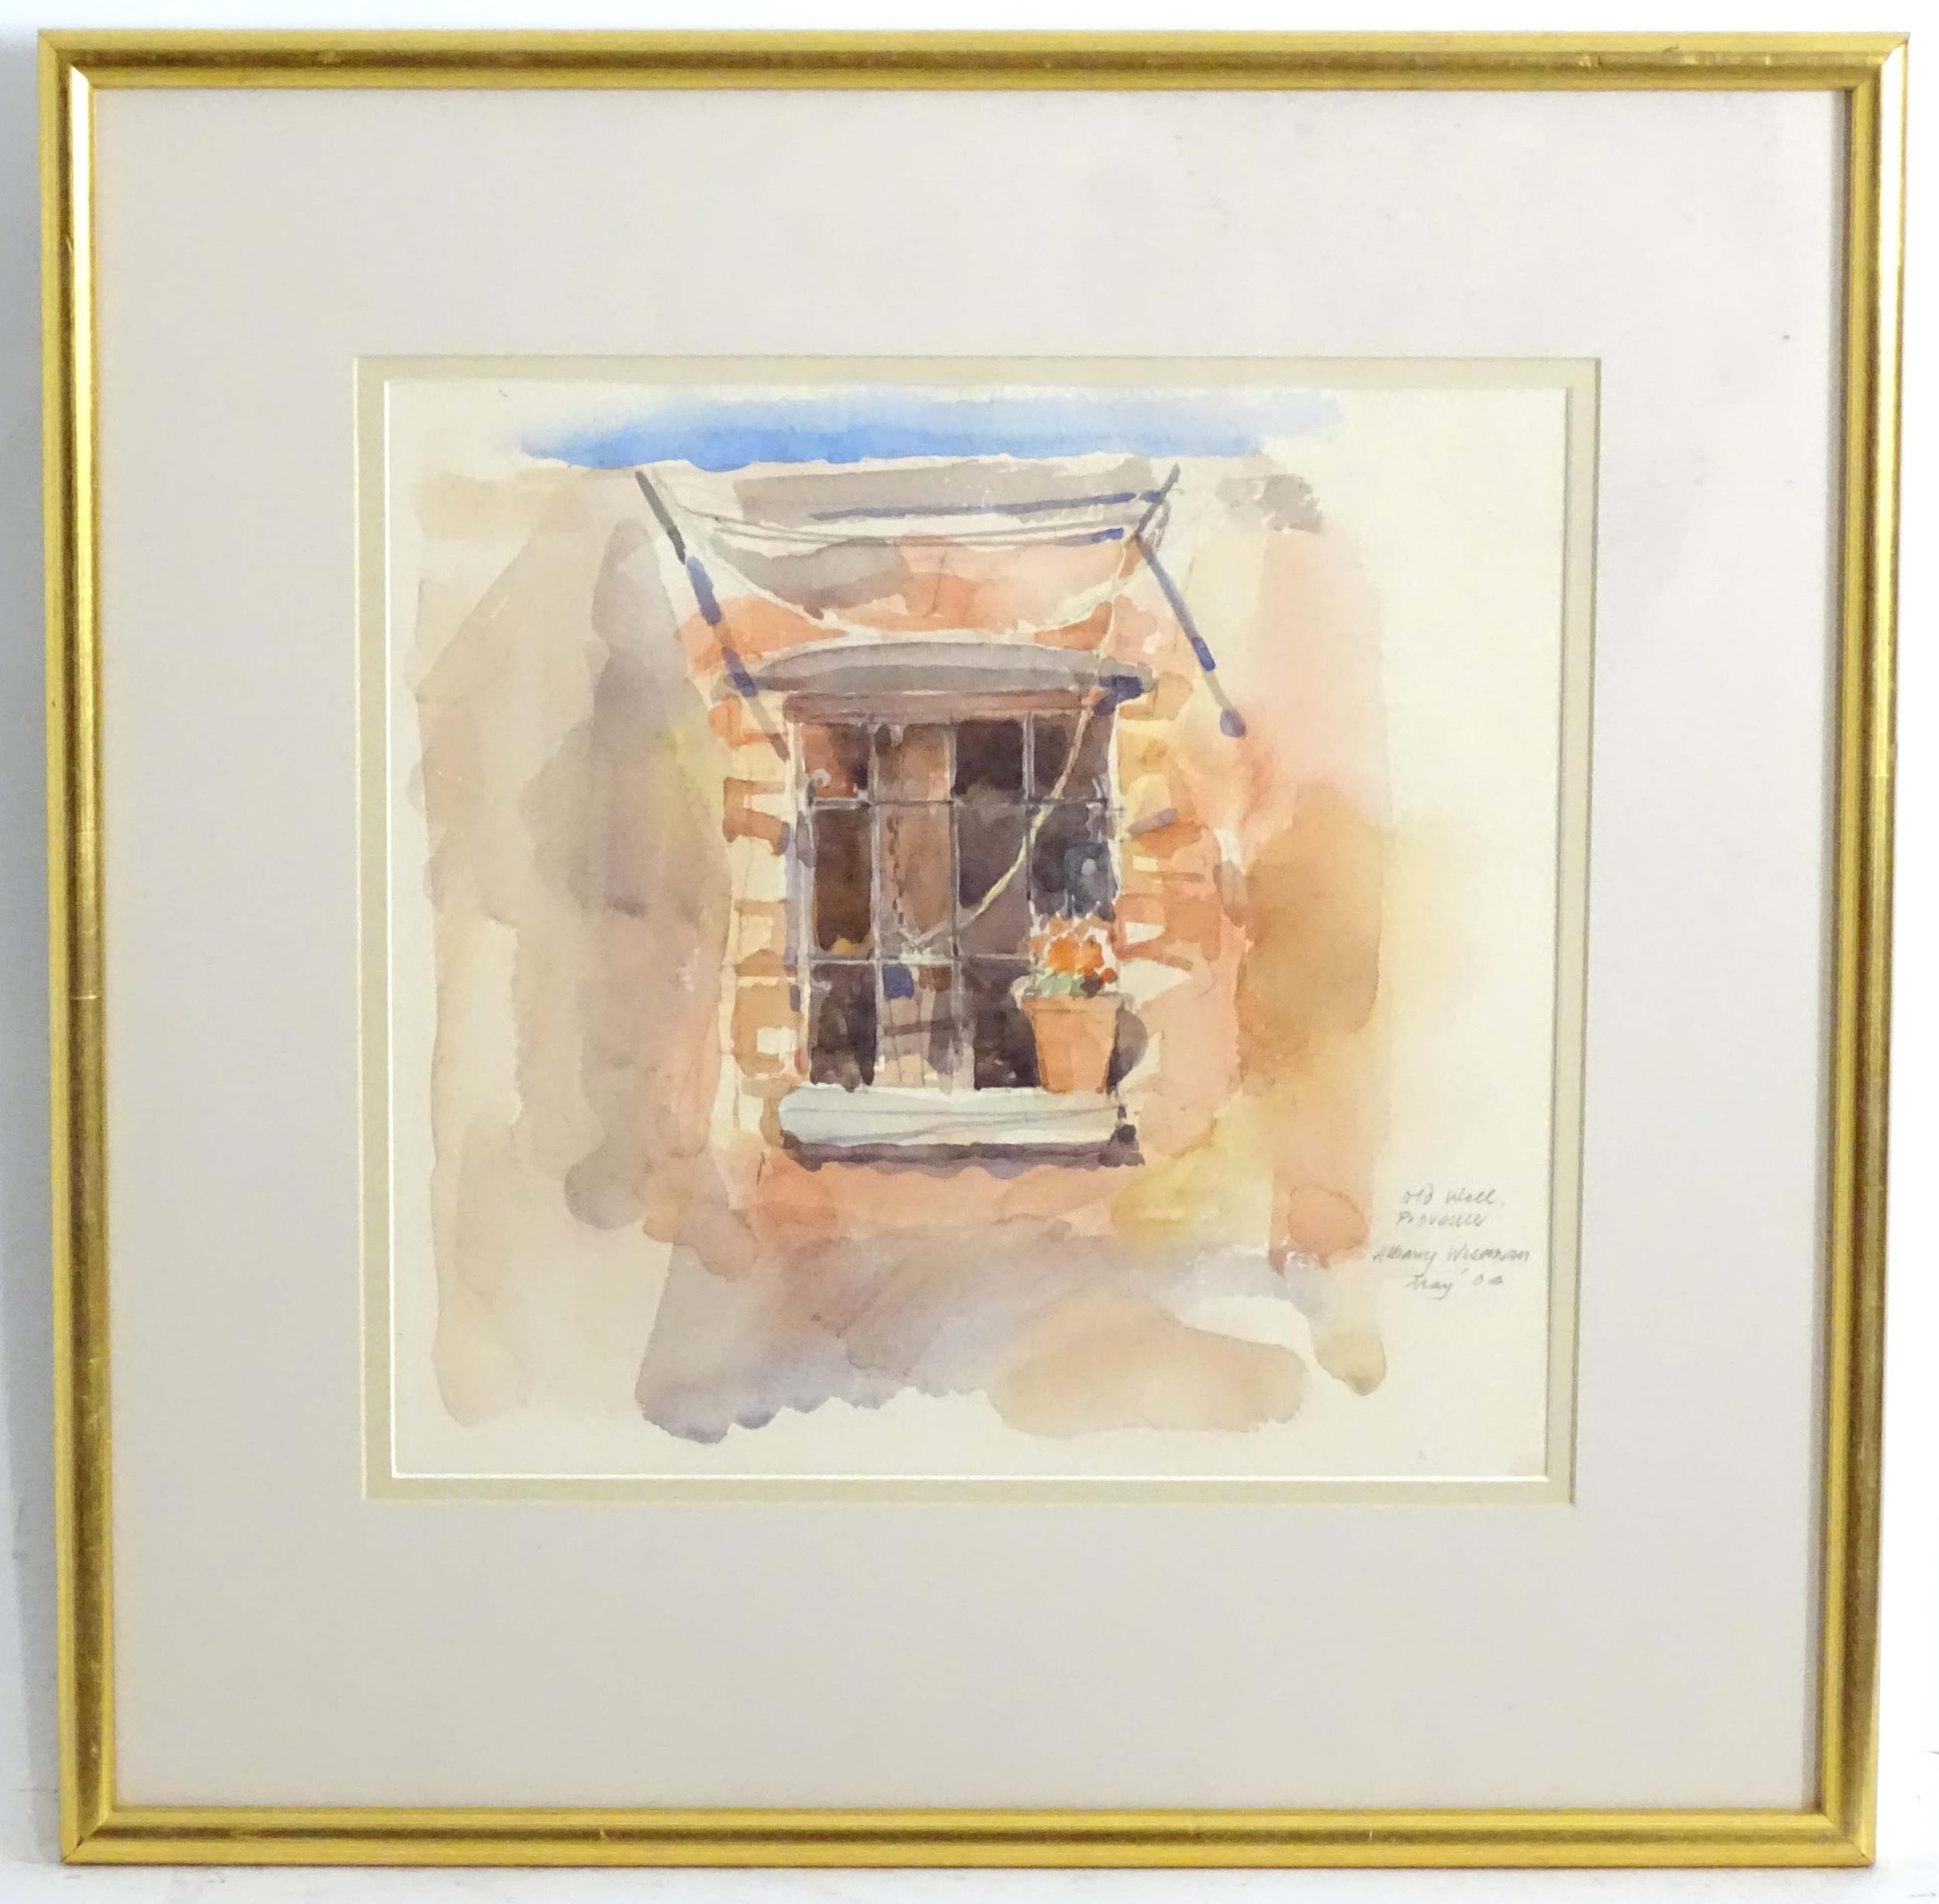 Albany Wiseman (1930-2021), Watercolour, Old Well, Provence, France. A view of a window with a plant